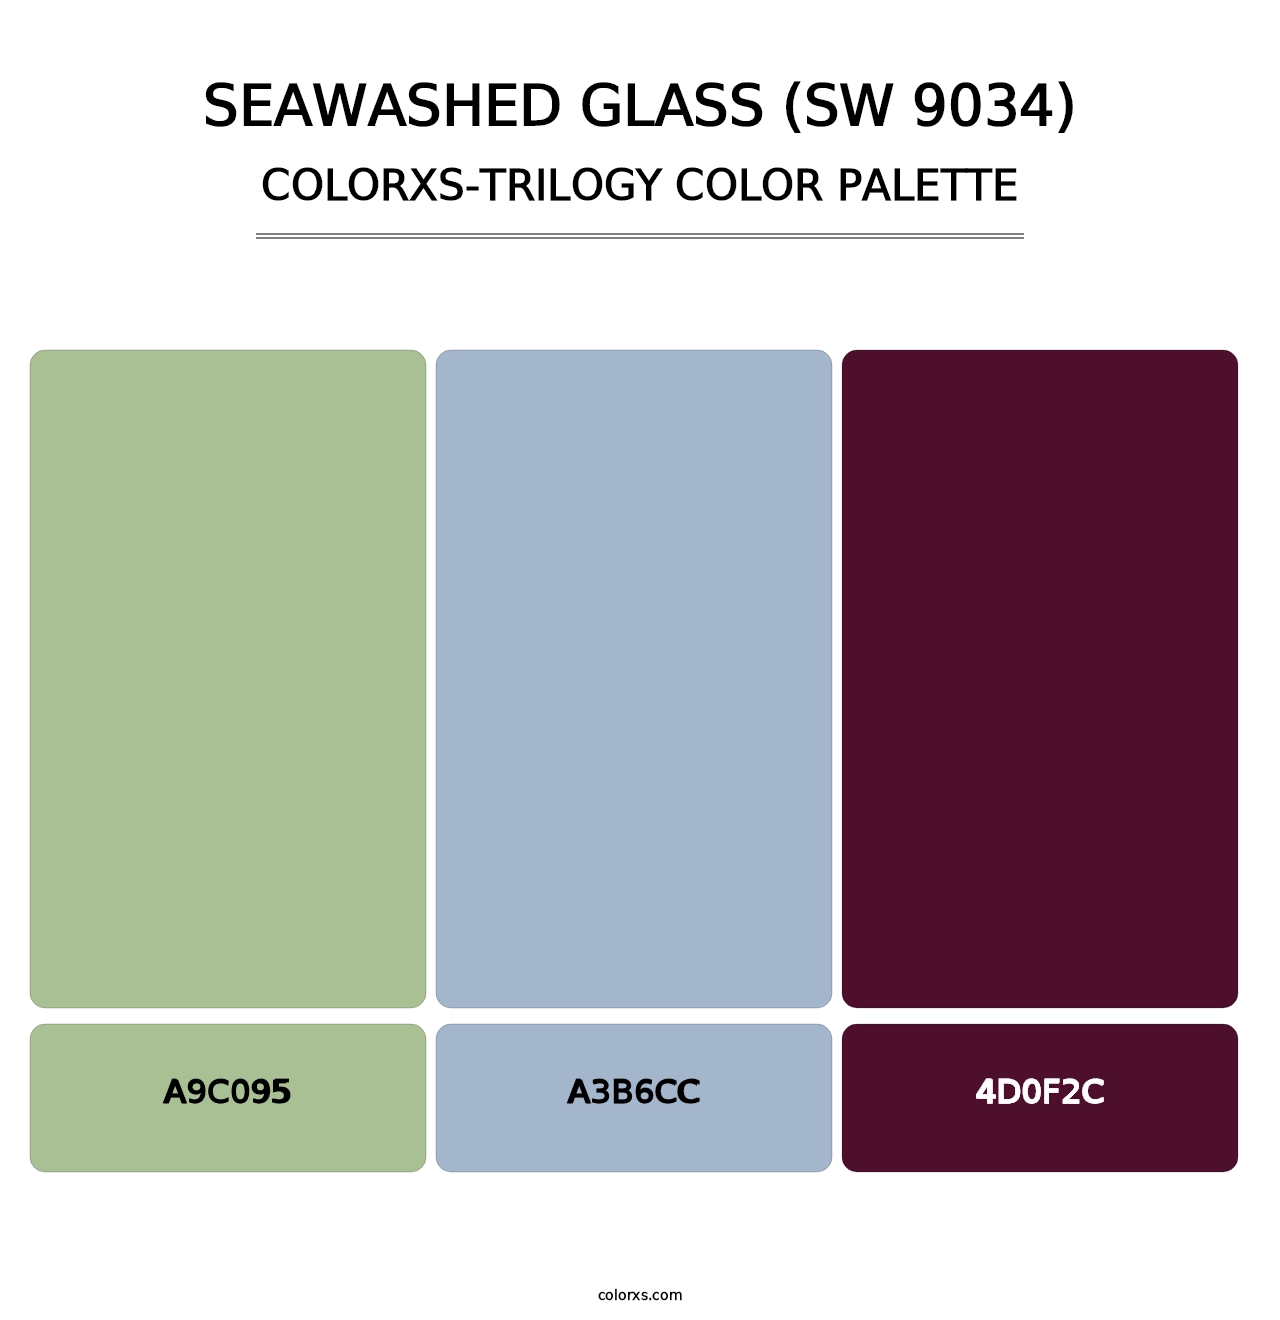 Seawashed Glass (SW 9034) - Colorxs Trilogy Palette